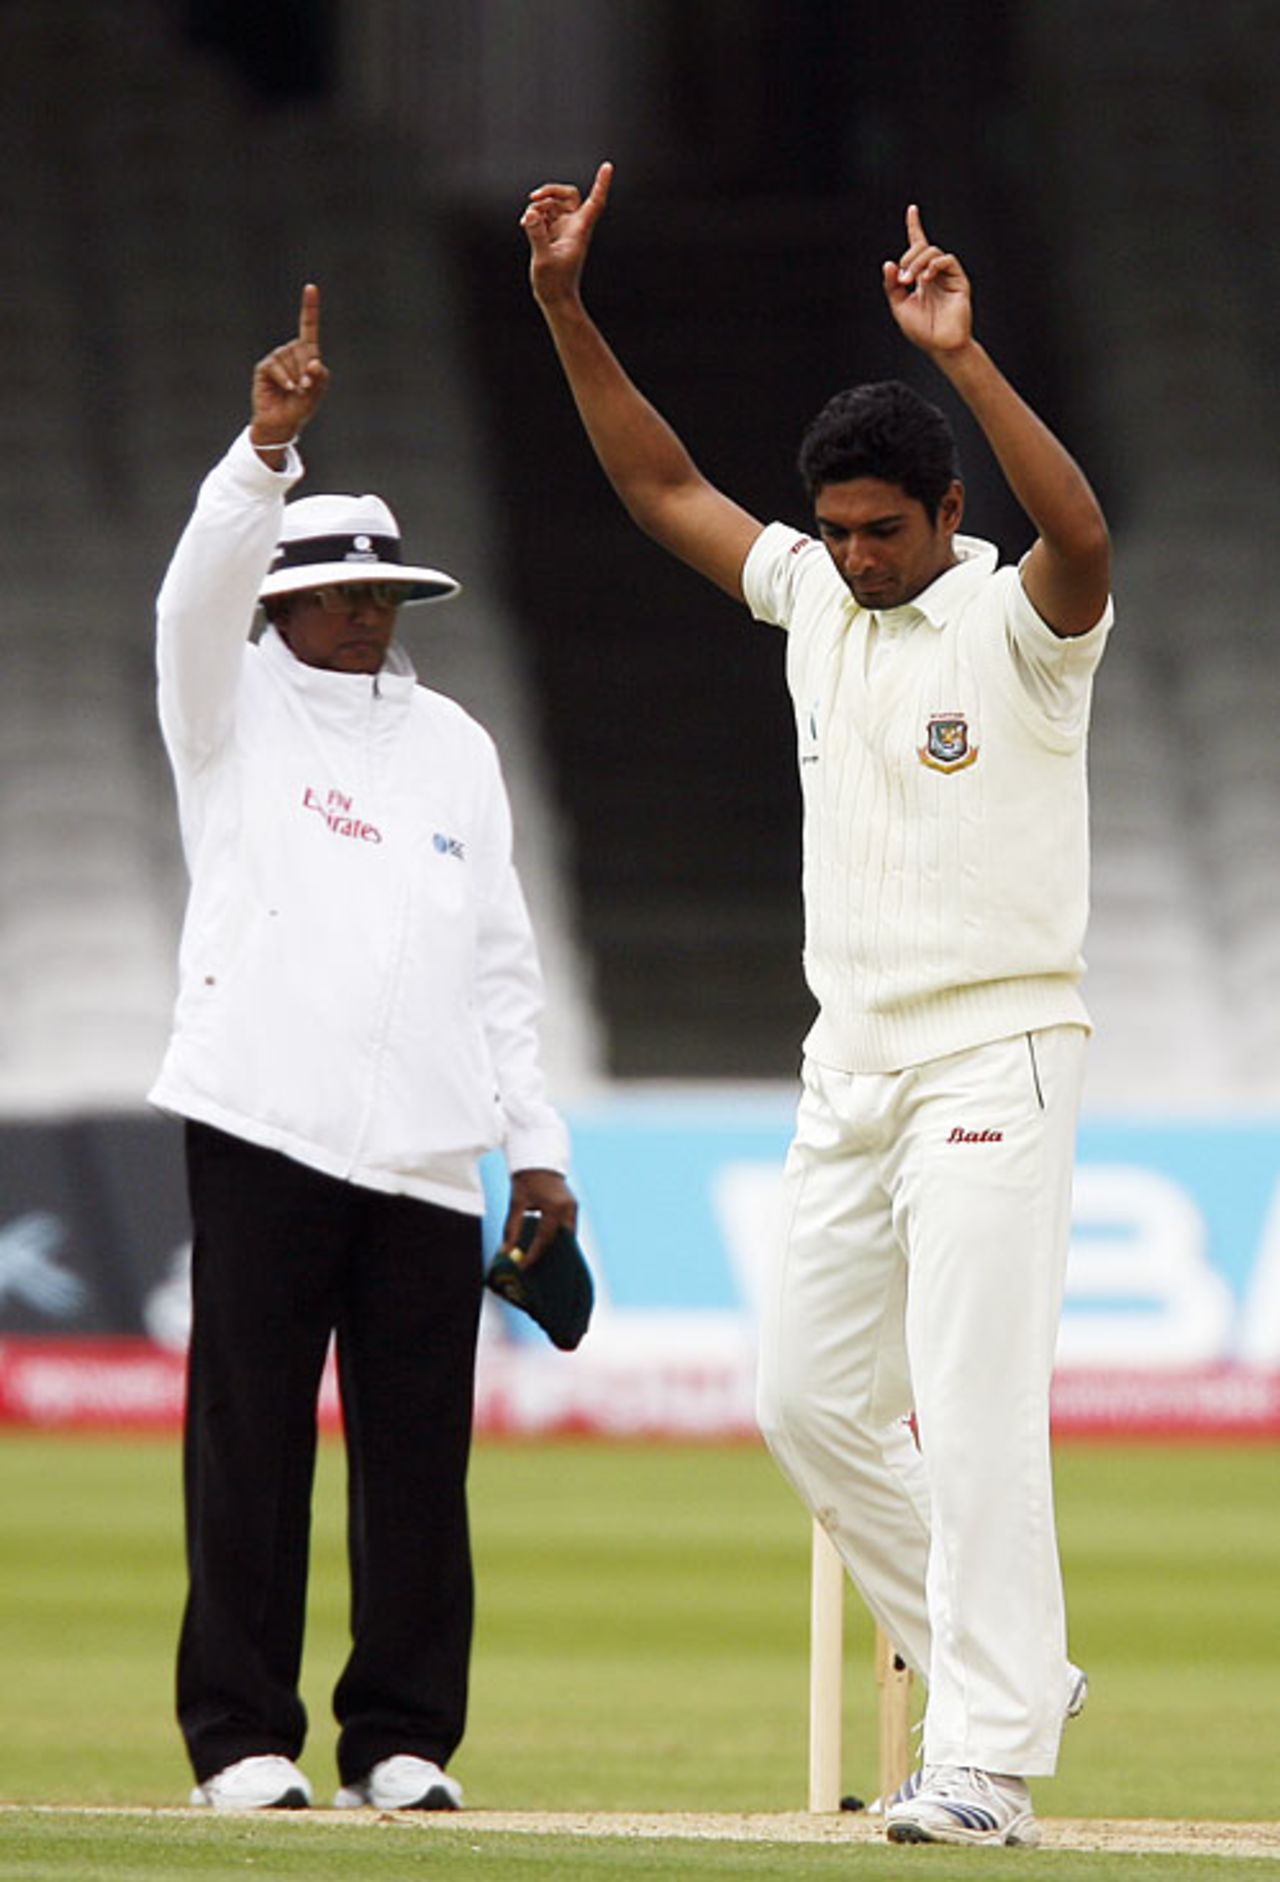 Mahmudullah claimed the consolation wicket of Alastair Cook, England v Bangladesh, 1st Test, Lord's, May 31, 2010 
